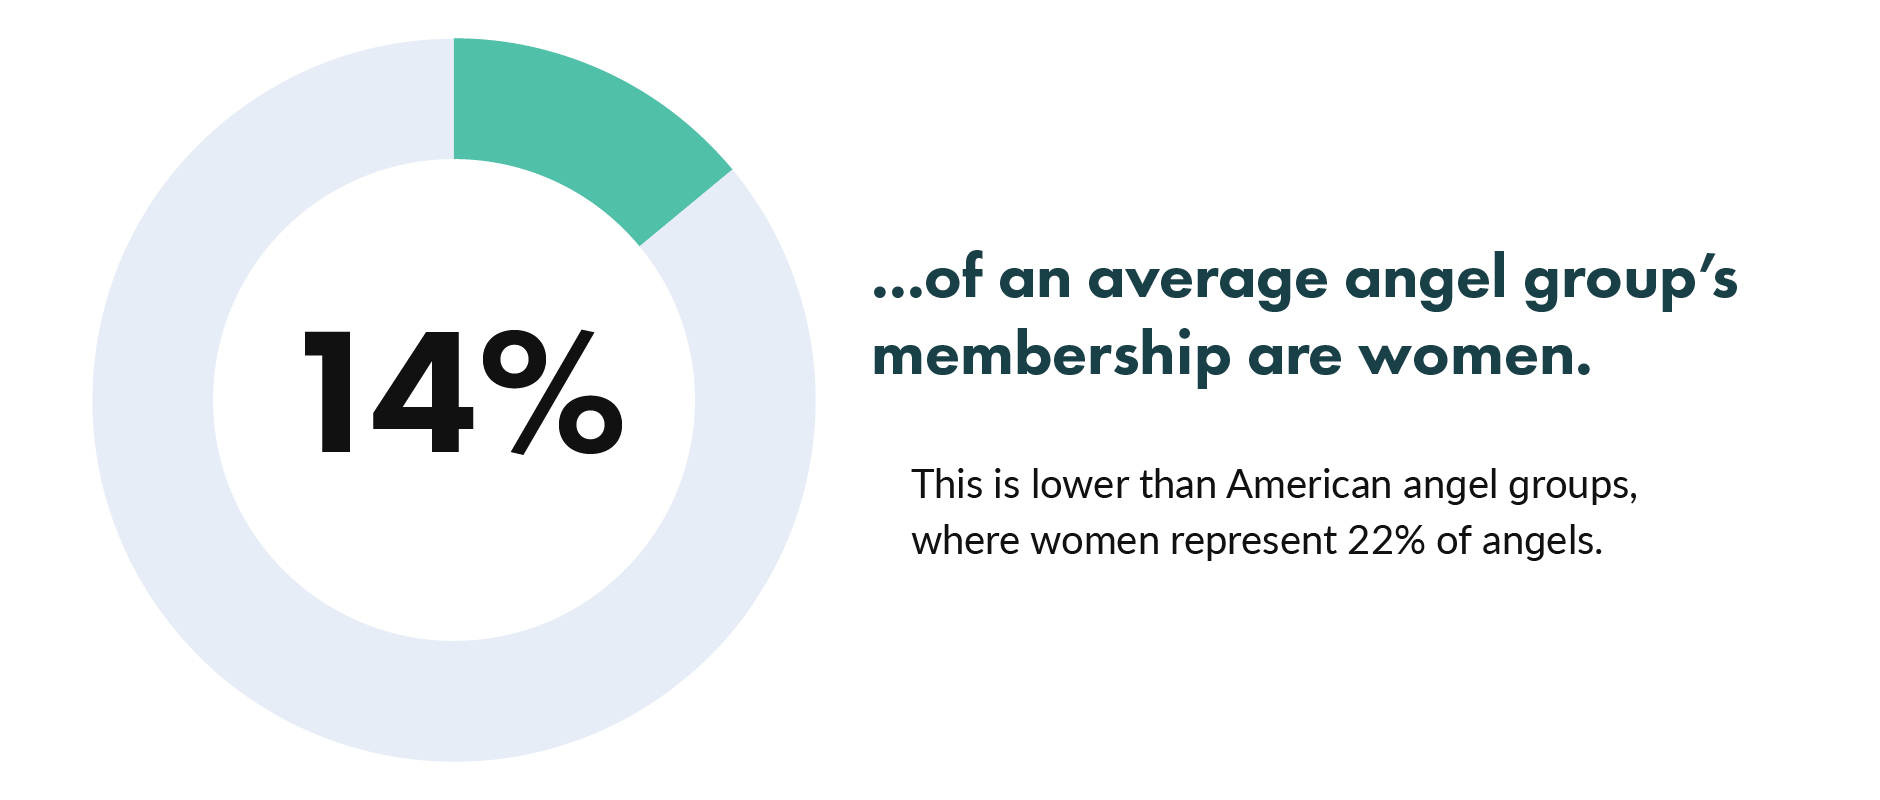 14% of an average angel group's membership are women. This is lower than American angel groups, where women represent 22% of angels.